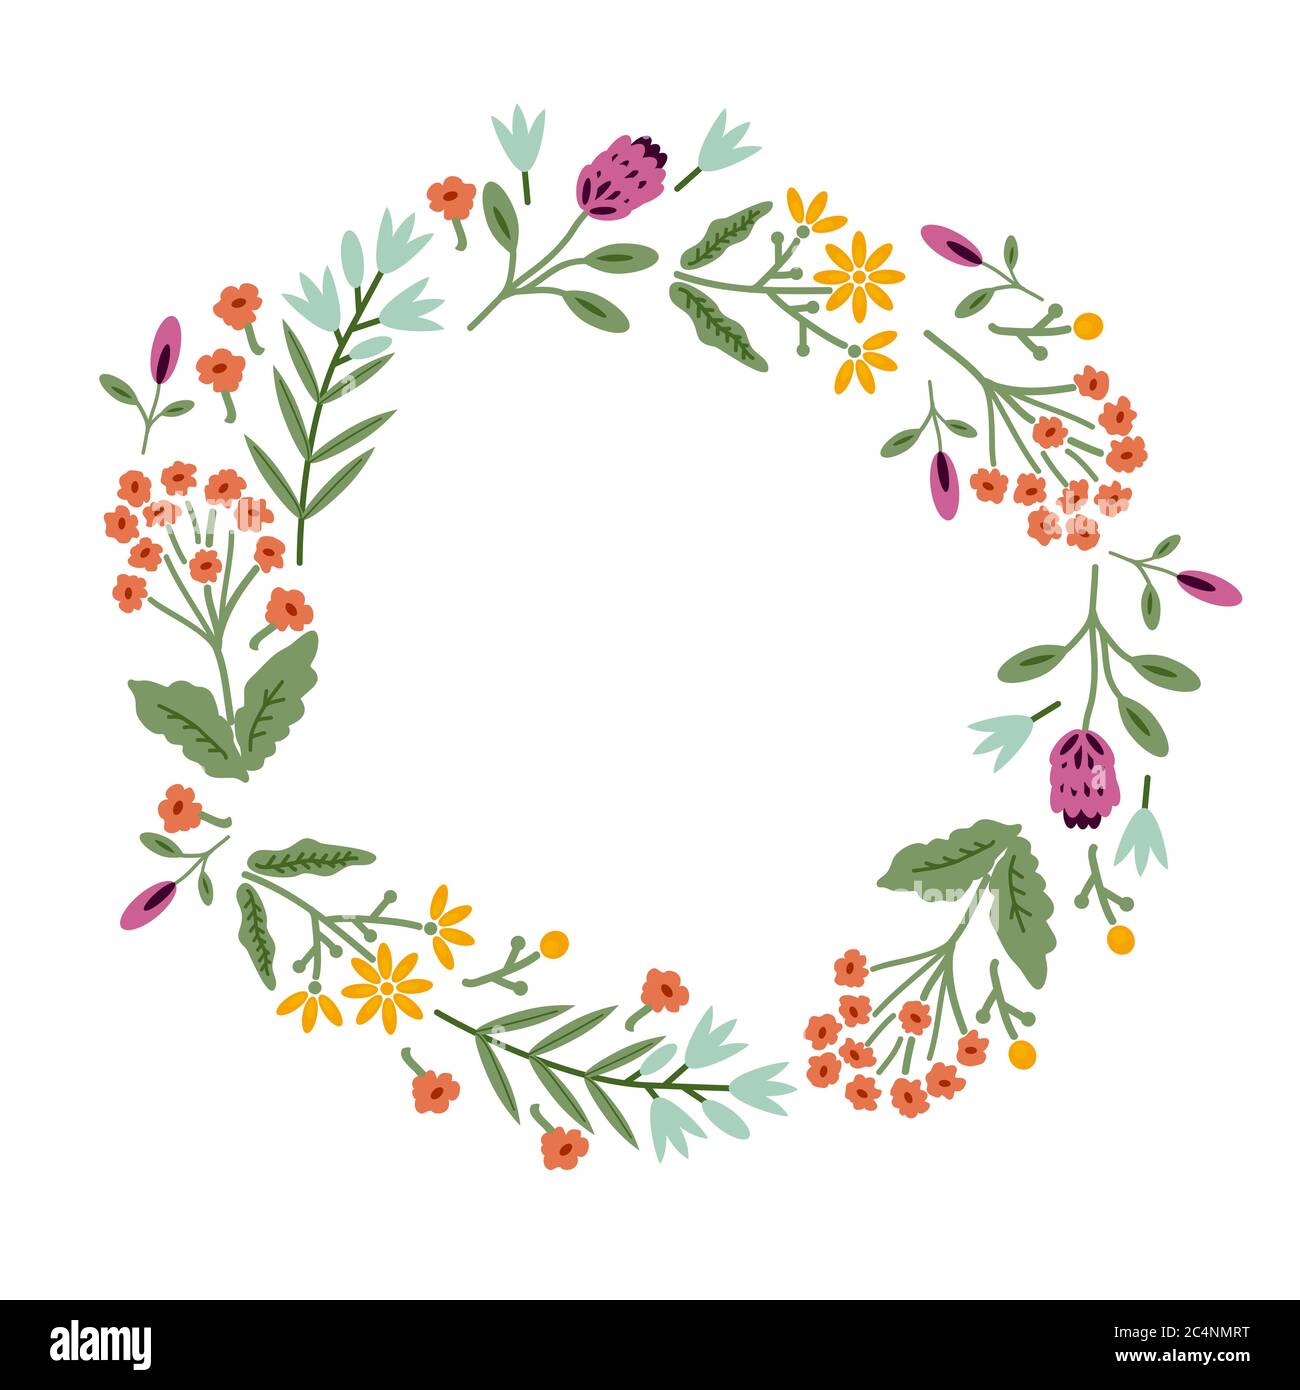 Decorative frame with wild flowers Stock Vector